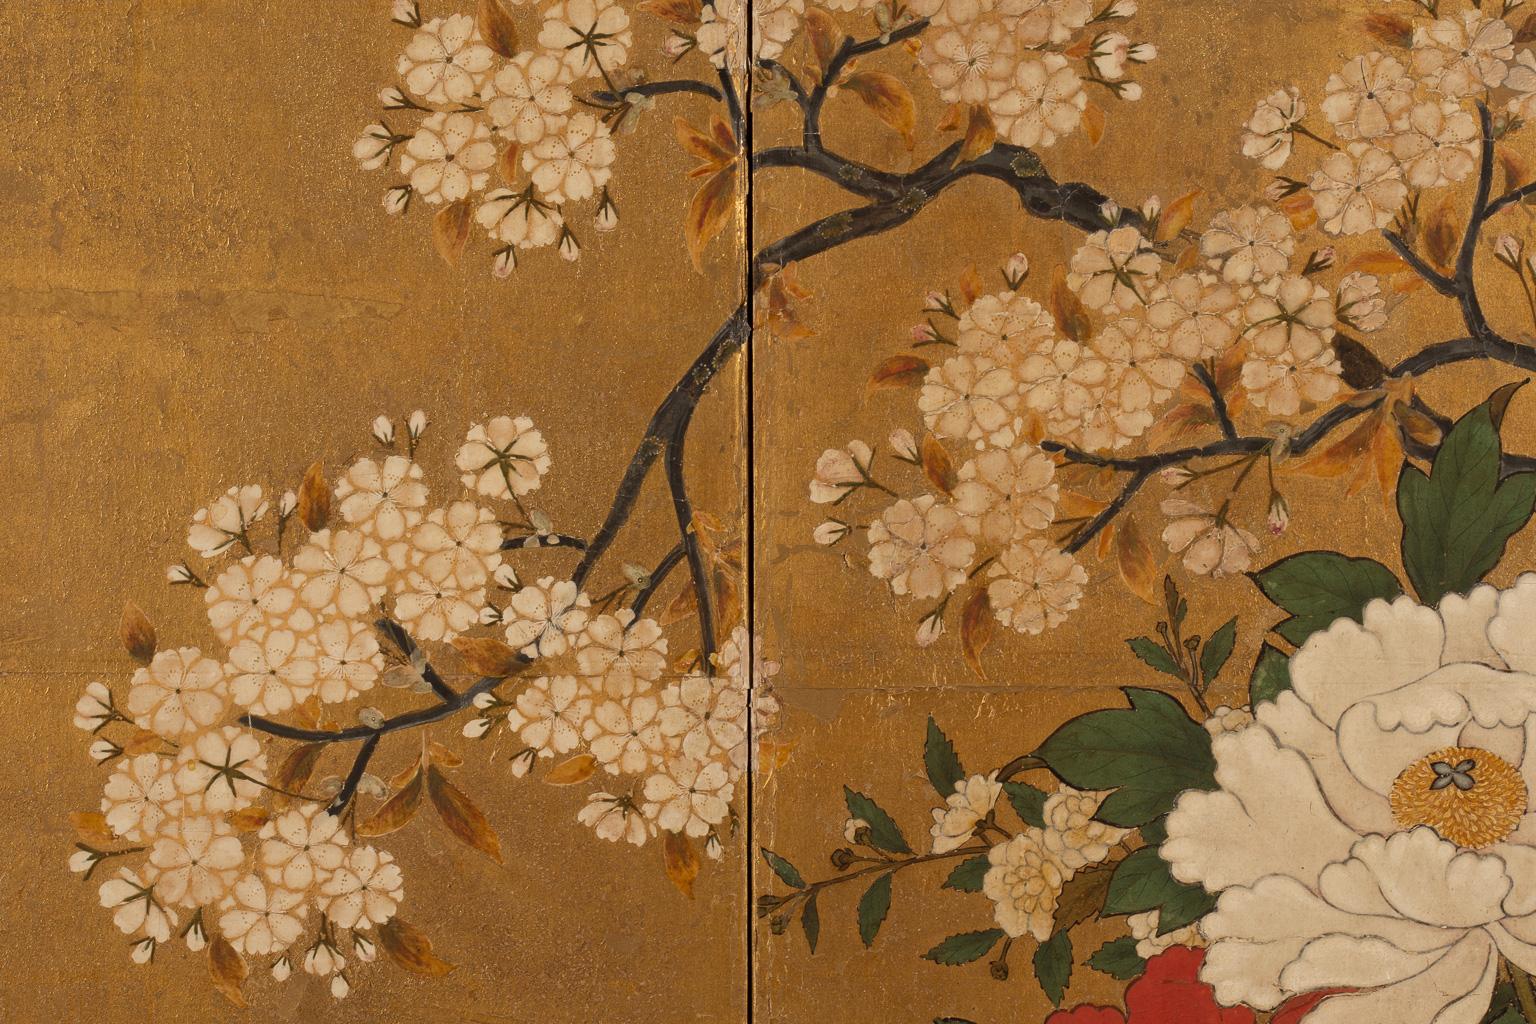 Karamono with flower arrangements and rare birds
Edo period, 18th century
Pair of two-panel folding screens Ink, colors, gofun and gold leaf on paper

Each 170 by 165 cm

 

The term karamono is used to define ceramic, carvel lacquerware,